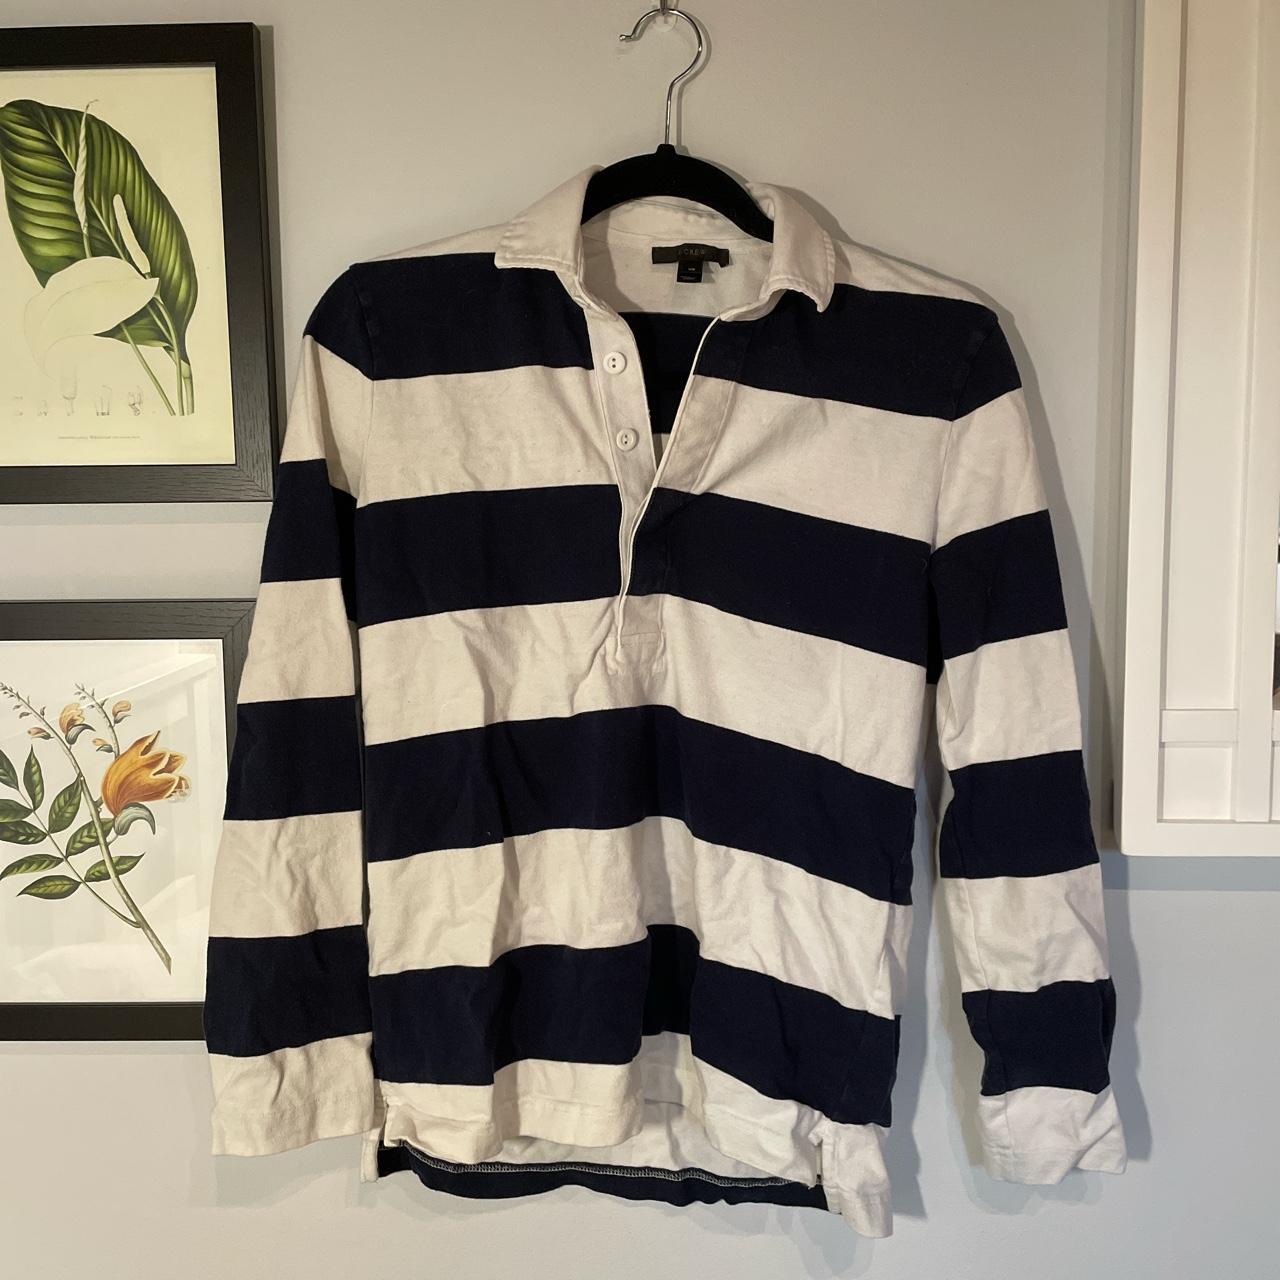 J Crew striped longsleeve polo. Size XS but can also... - Depop